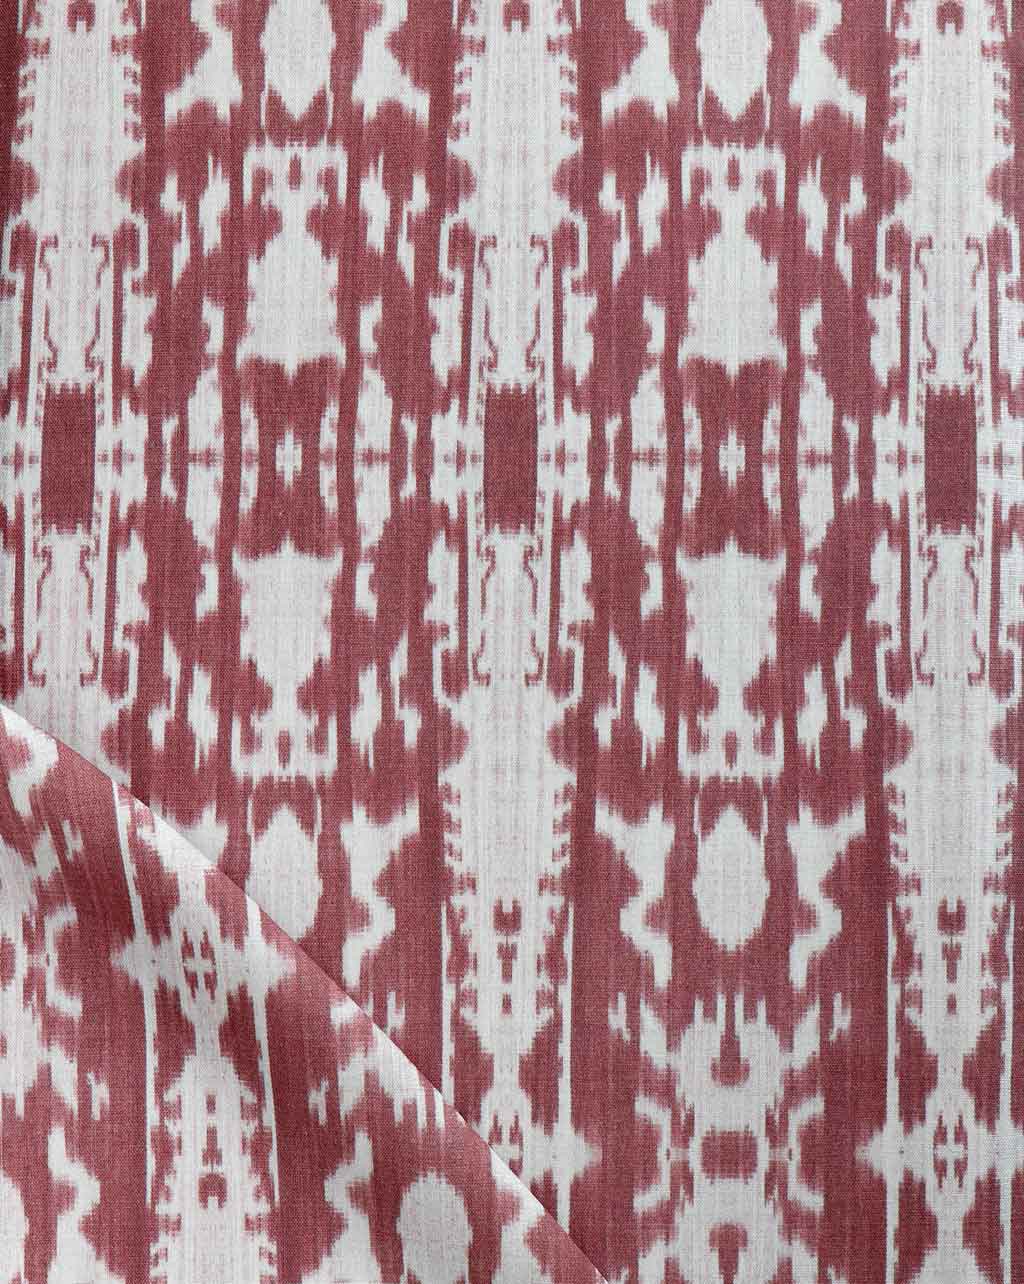 A close up of a red and white ikat fabric featuring the Biami Fabric Morinda Ikat pattern